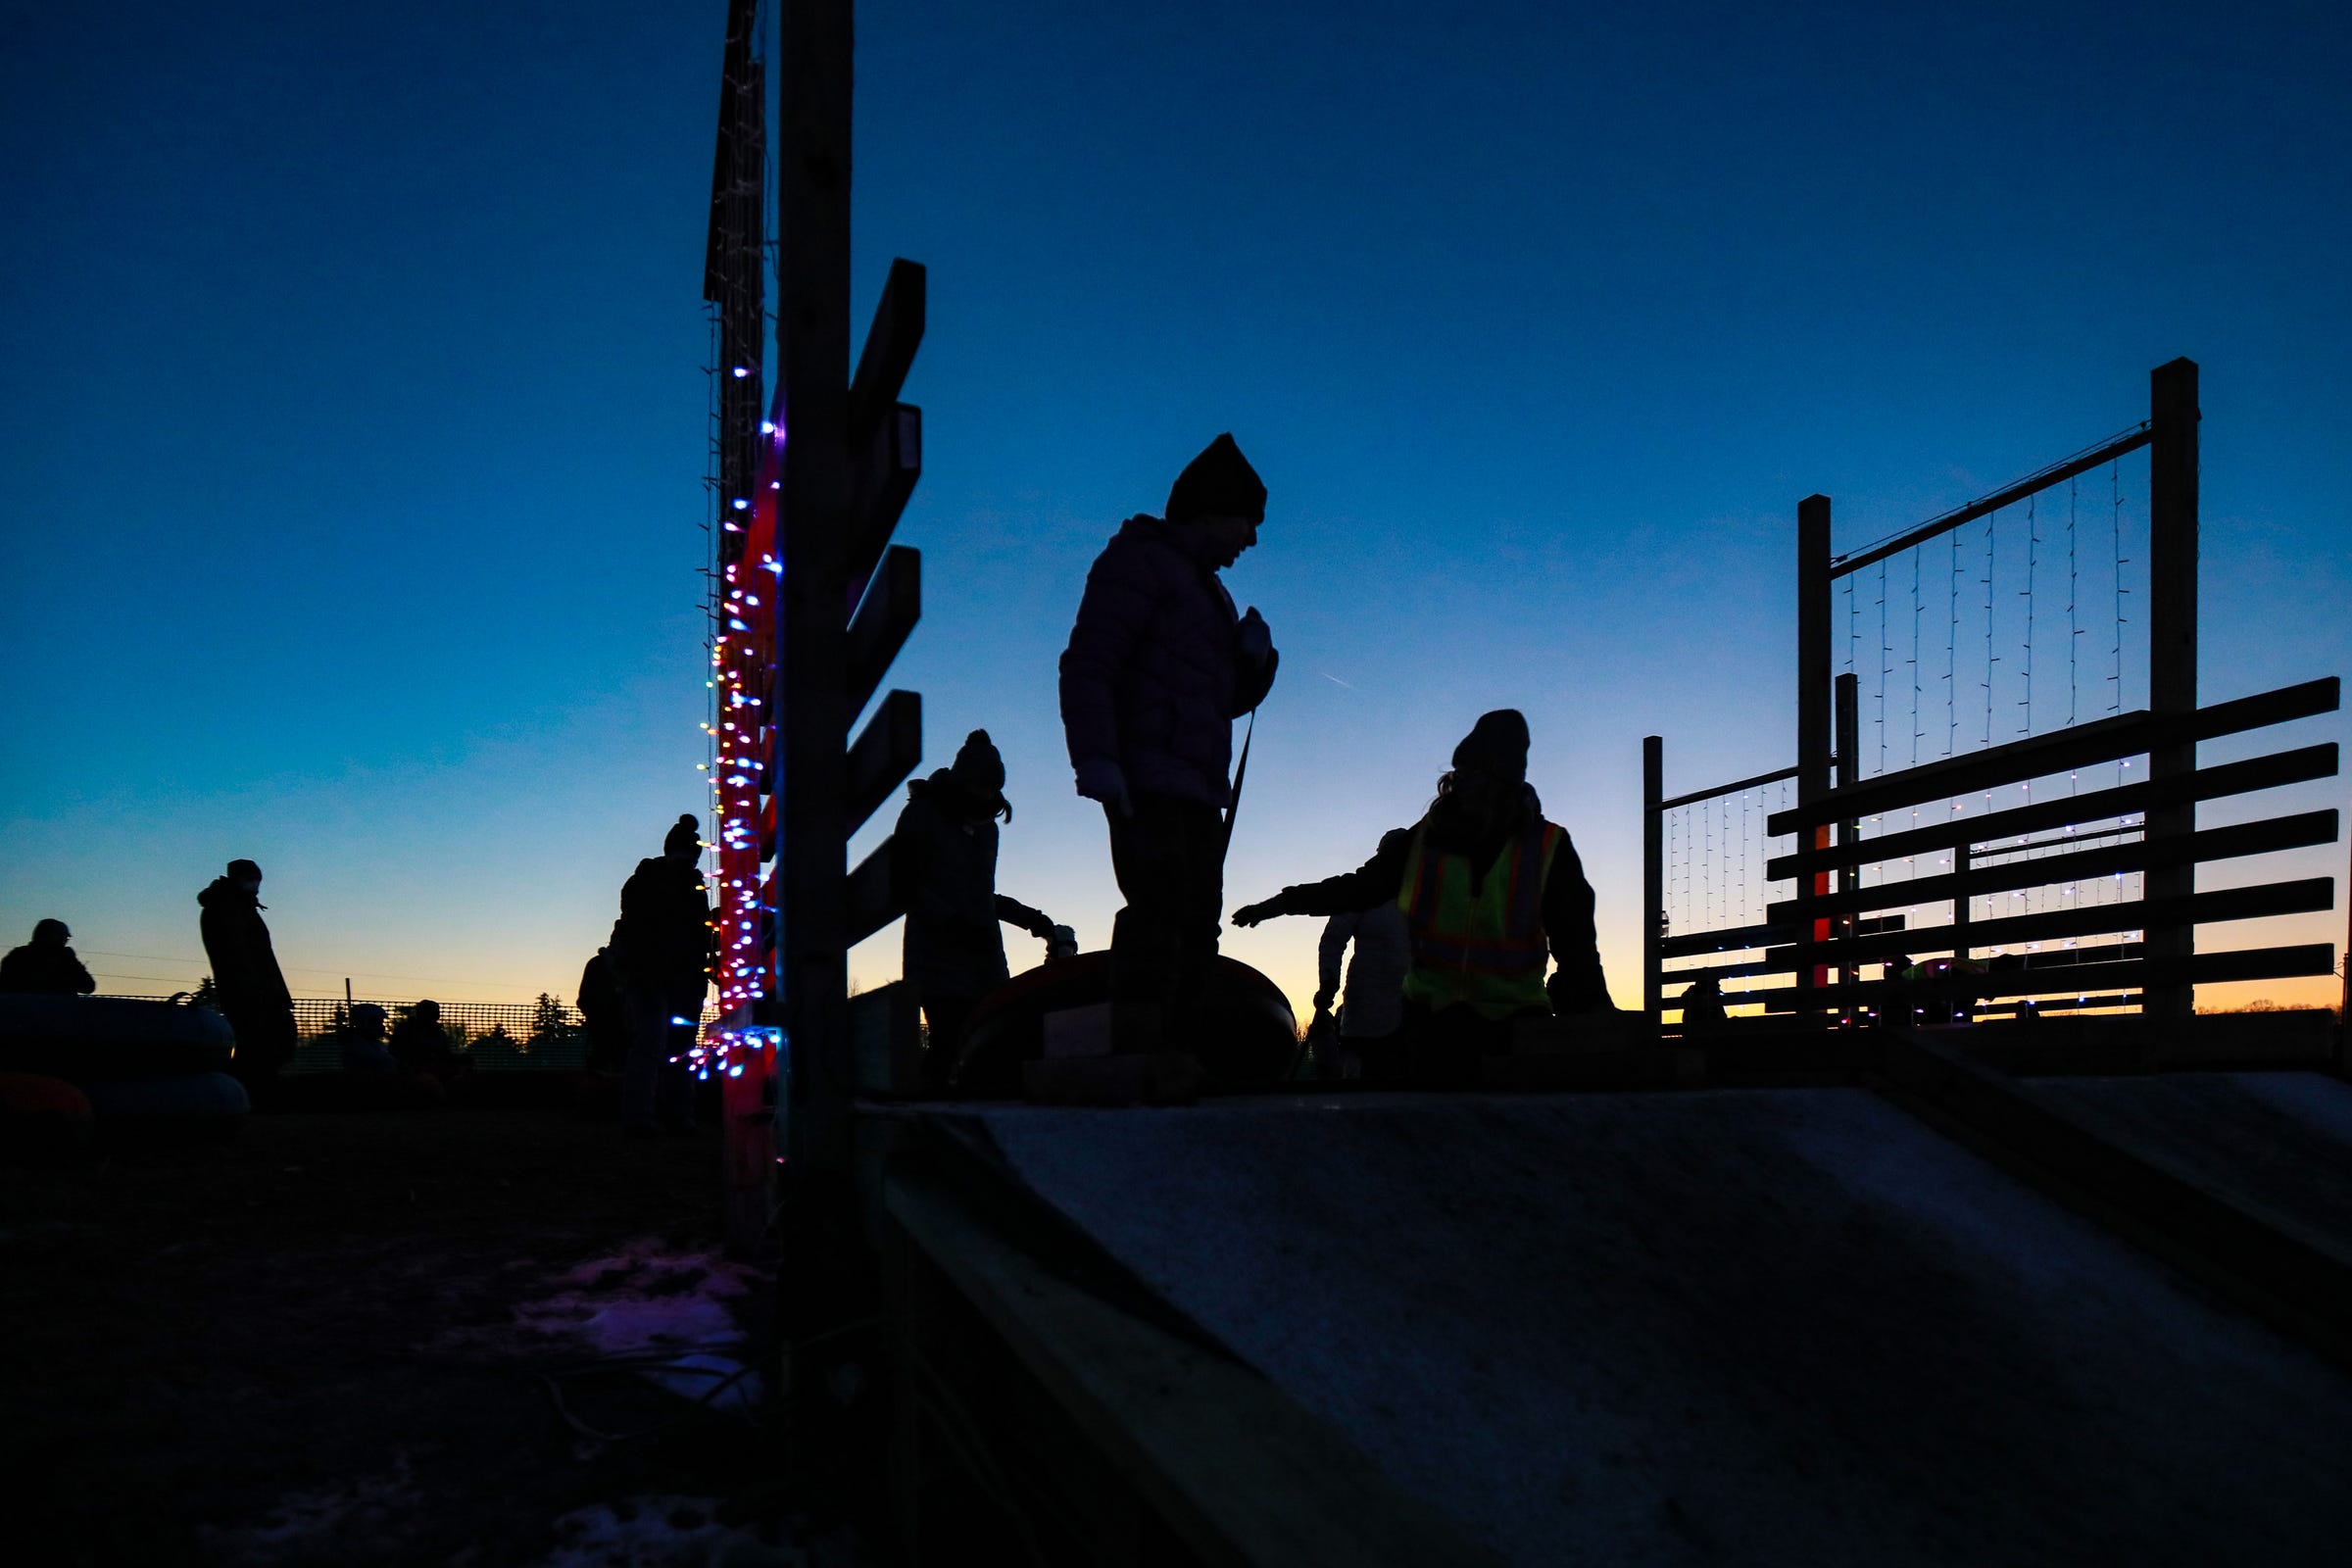 Sledding lanes at Bowers School Farm Winter Park are decorated with blinking lights and feature a snow carpet used in the south to combat the lack of snow to smooth out surface tension. Park-goers braved the frigid temperatures that reached 5 degrees Jan. 15, 2022, to rocket down the hill, spinning and laughing on the way down. Alan Jaros, the director of the farm, says last year's hay bales were transformed into four sledding lanes in just 30 days.